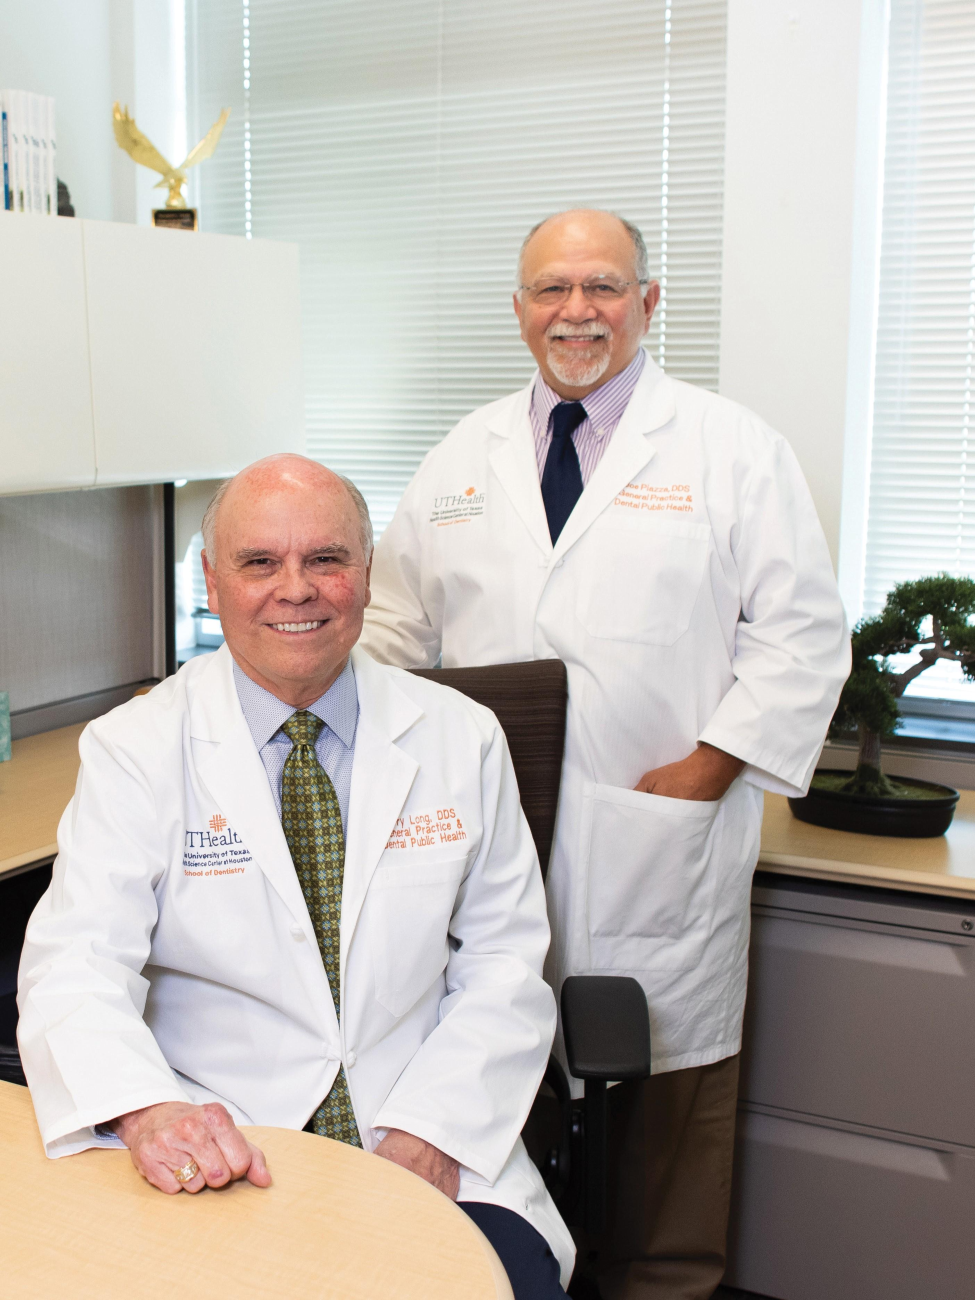 PACE Center practice consultants S. Jerry Long, DDS and Joe M. Piazza